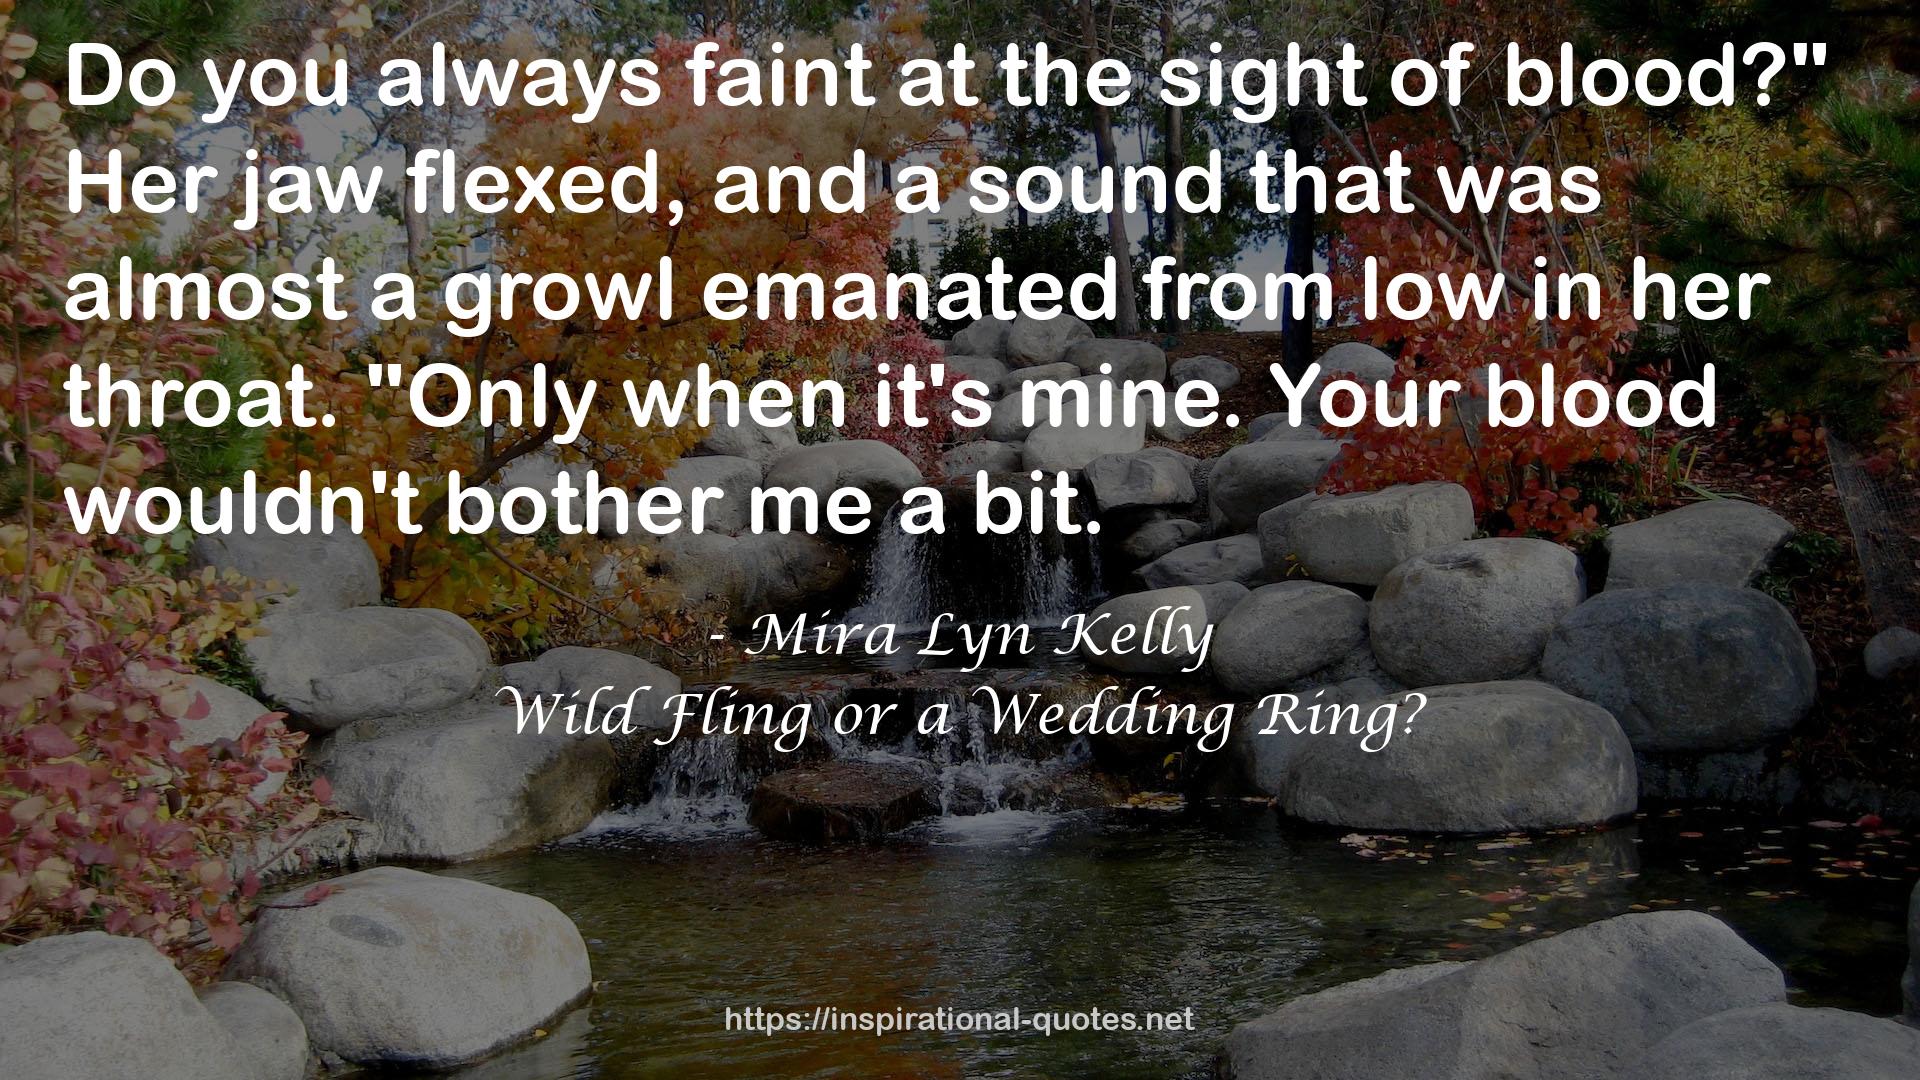 Wild Fling or a Wedding Ring? QUOTES